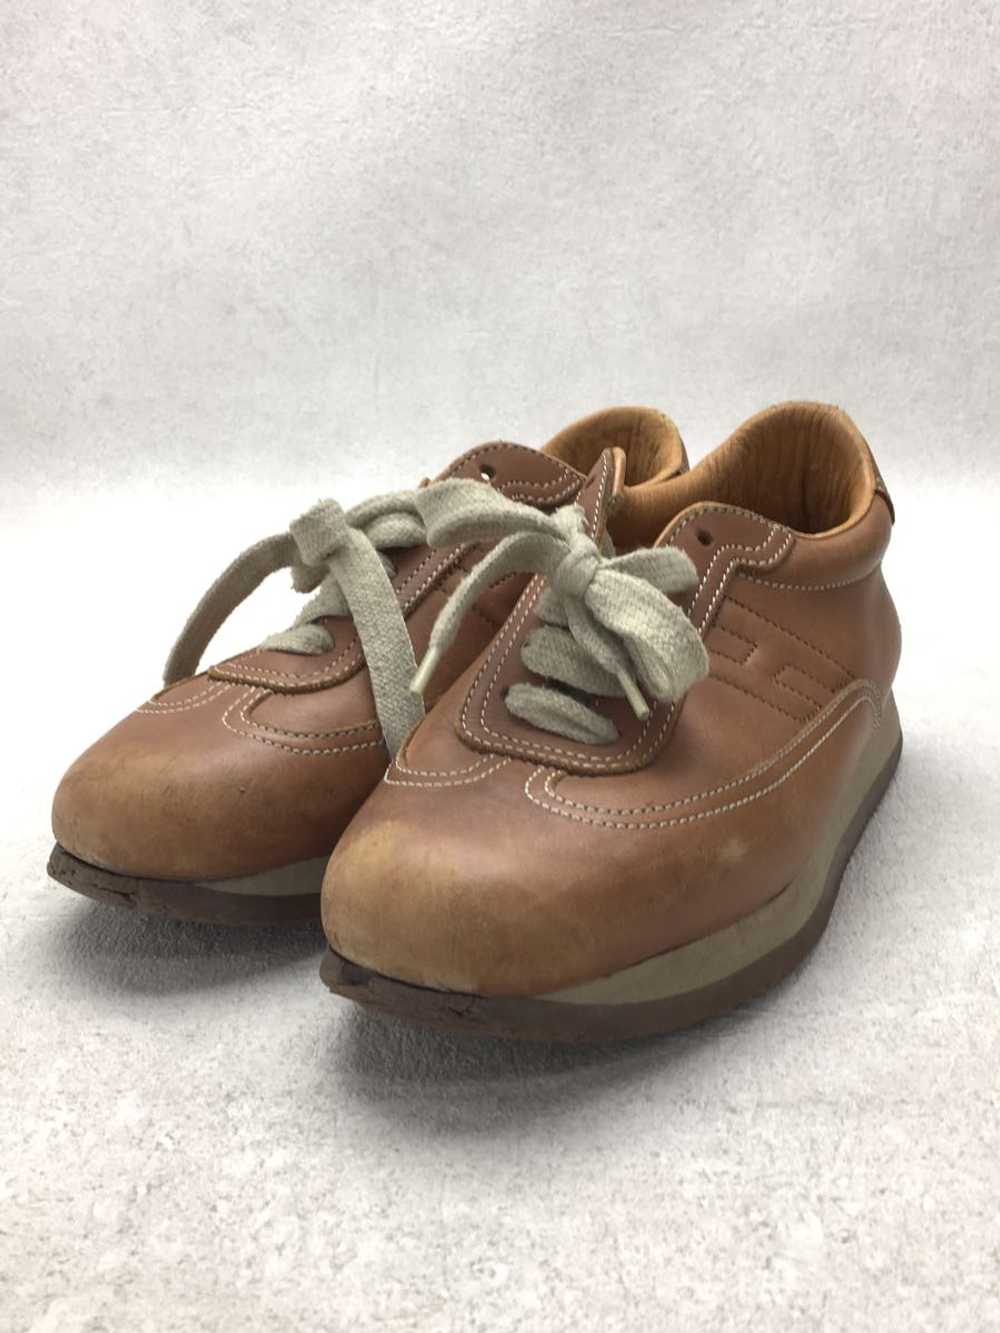 Hermes Low Cut Sneakers/36/Cml/Leather Shoes Bbk75 - image 2